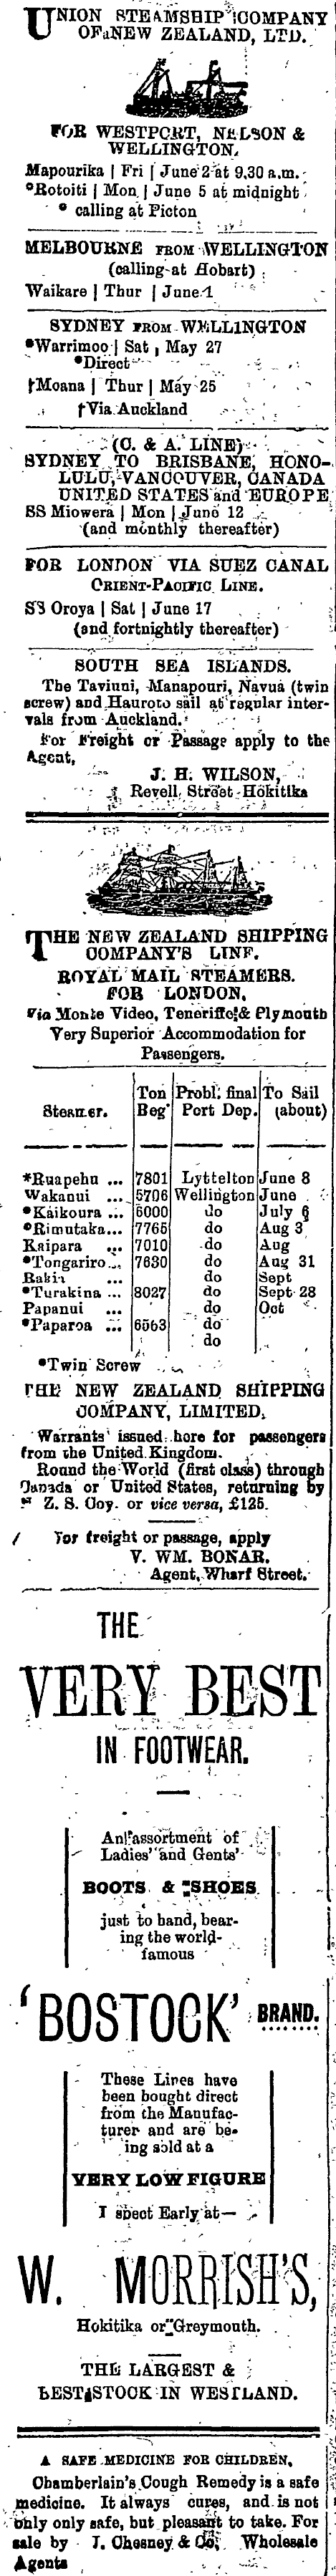 Papers Past Newspapers West Coast Times 2 June 1905 Page 2 Advertisements Column 1